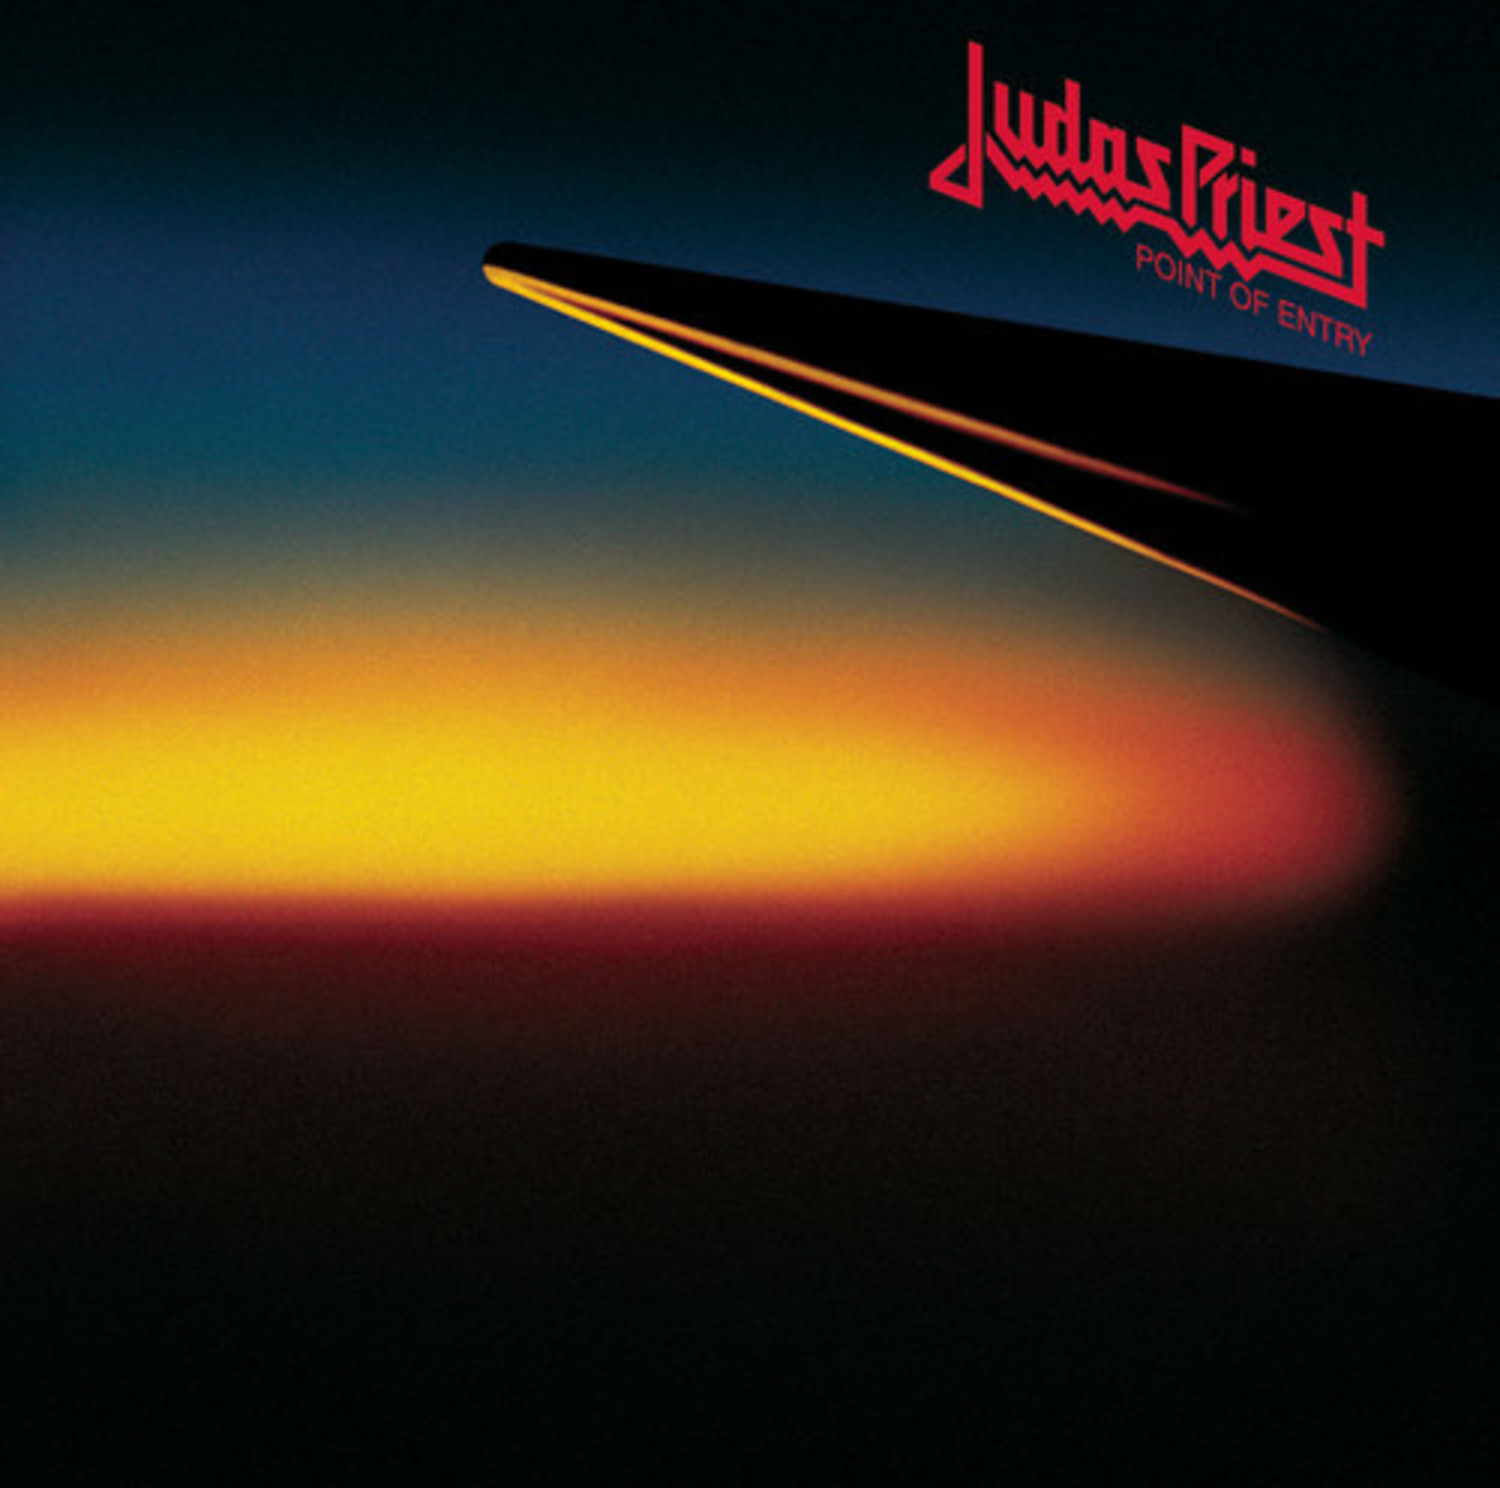 Judas Priest - Point Of Entry LP - Wax Trax Records